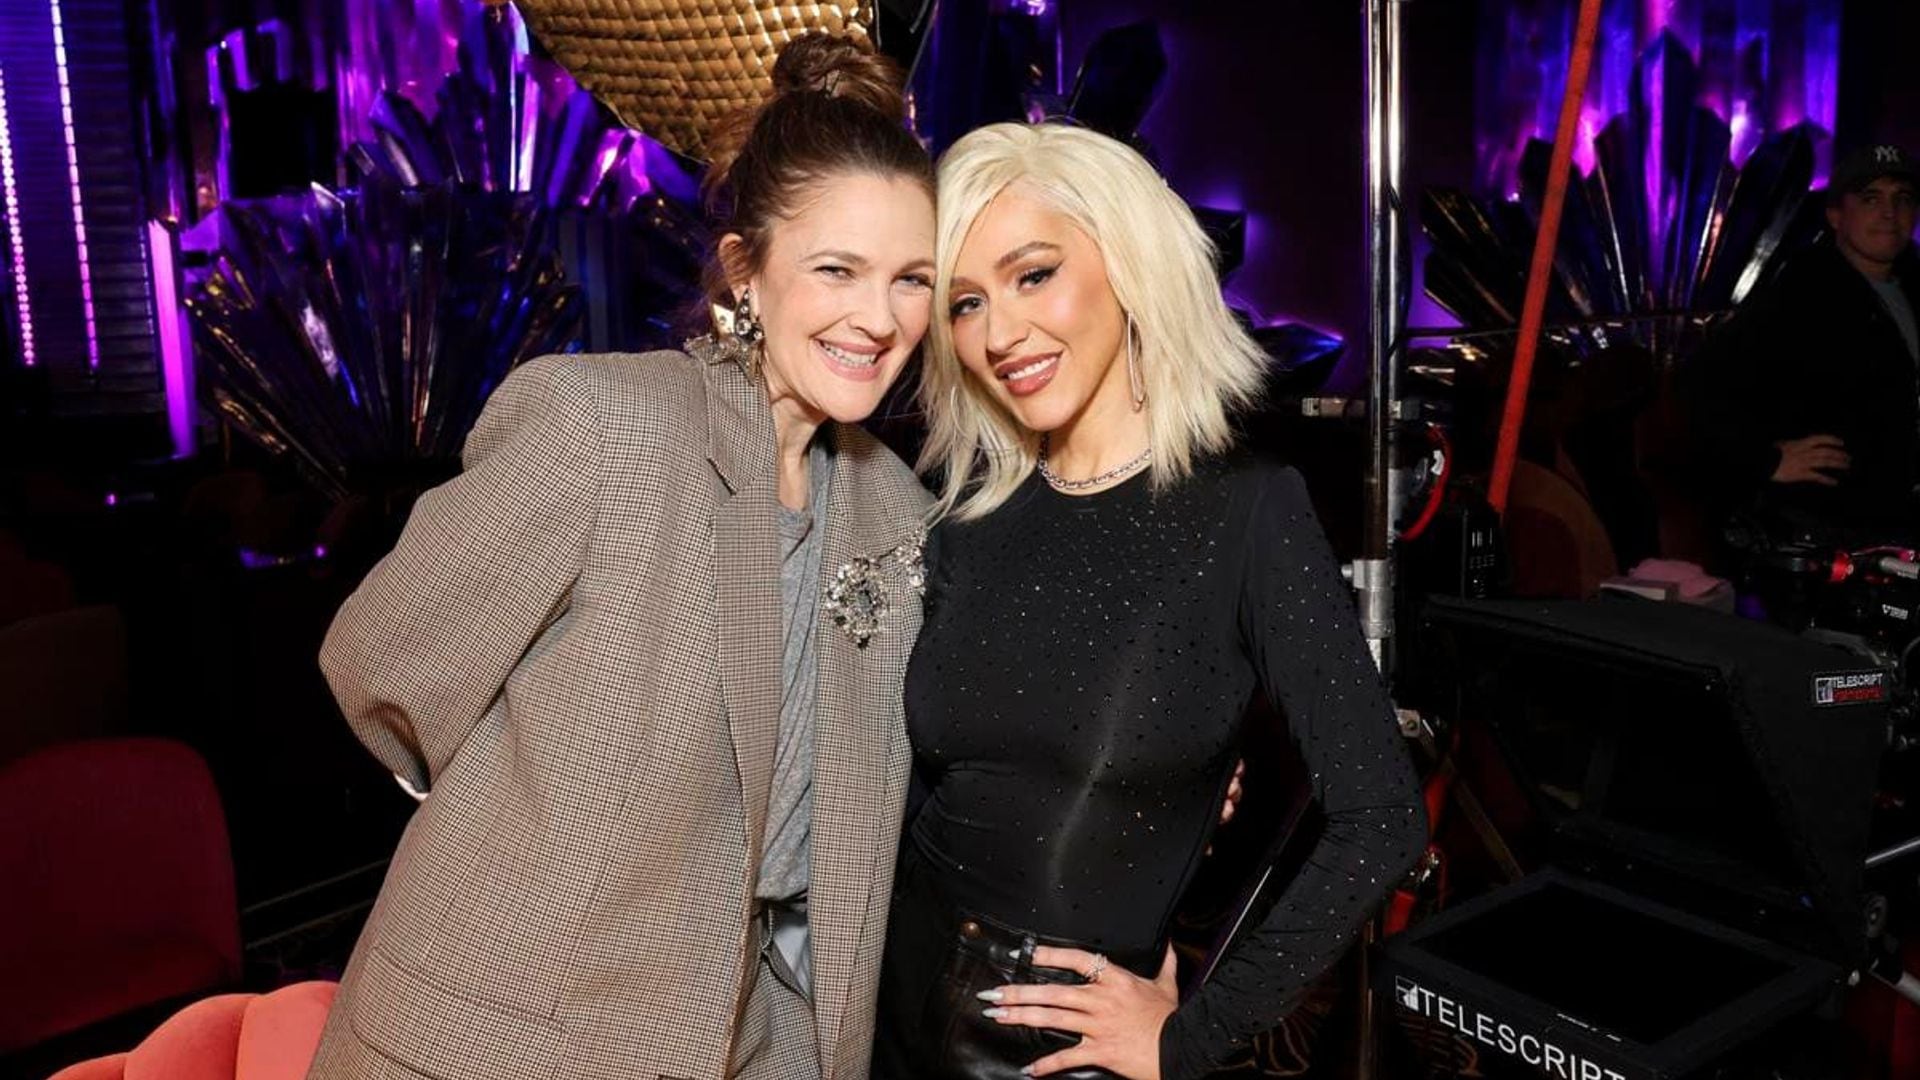 Christina Aguilera and Drew Barrymore bond over raising their daughters